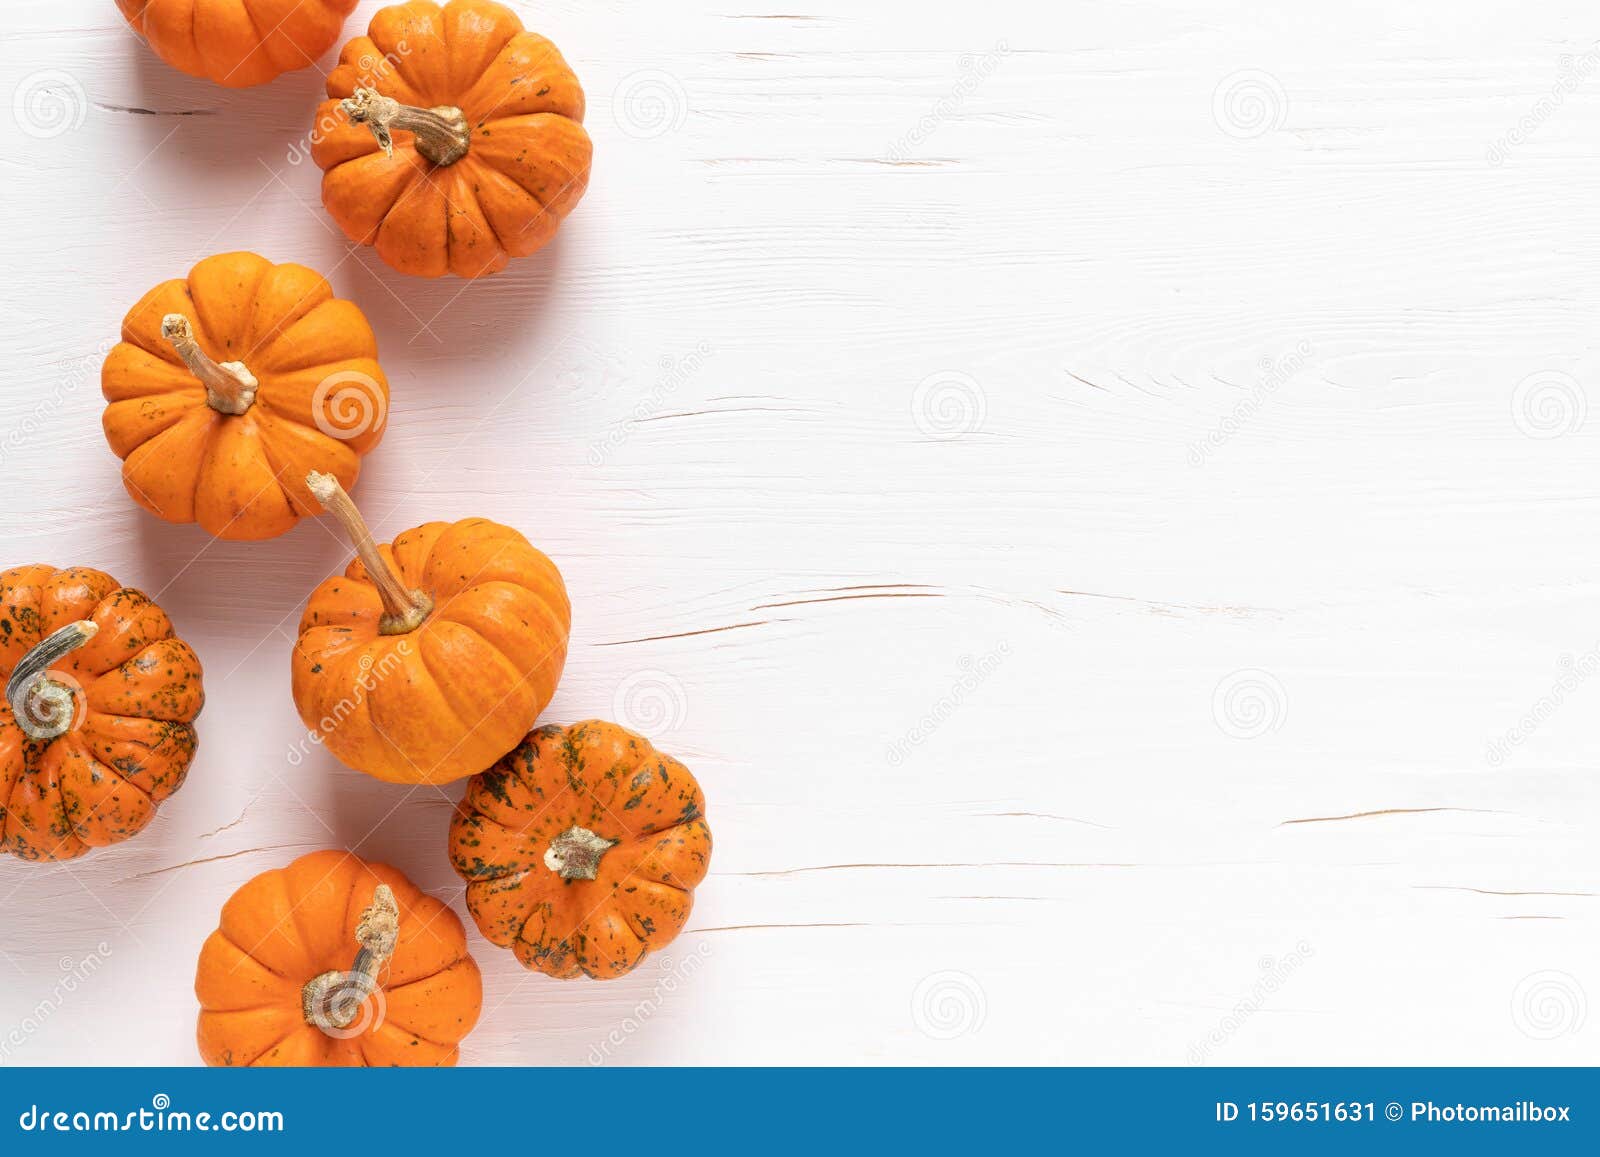 small decorative pumpkins on white wooden background. autumn, fall, thanksgiving or halloween day concept, flat lay, top view